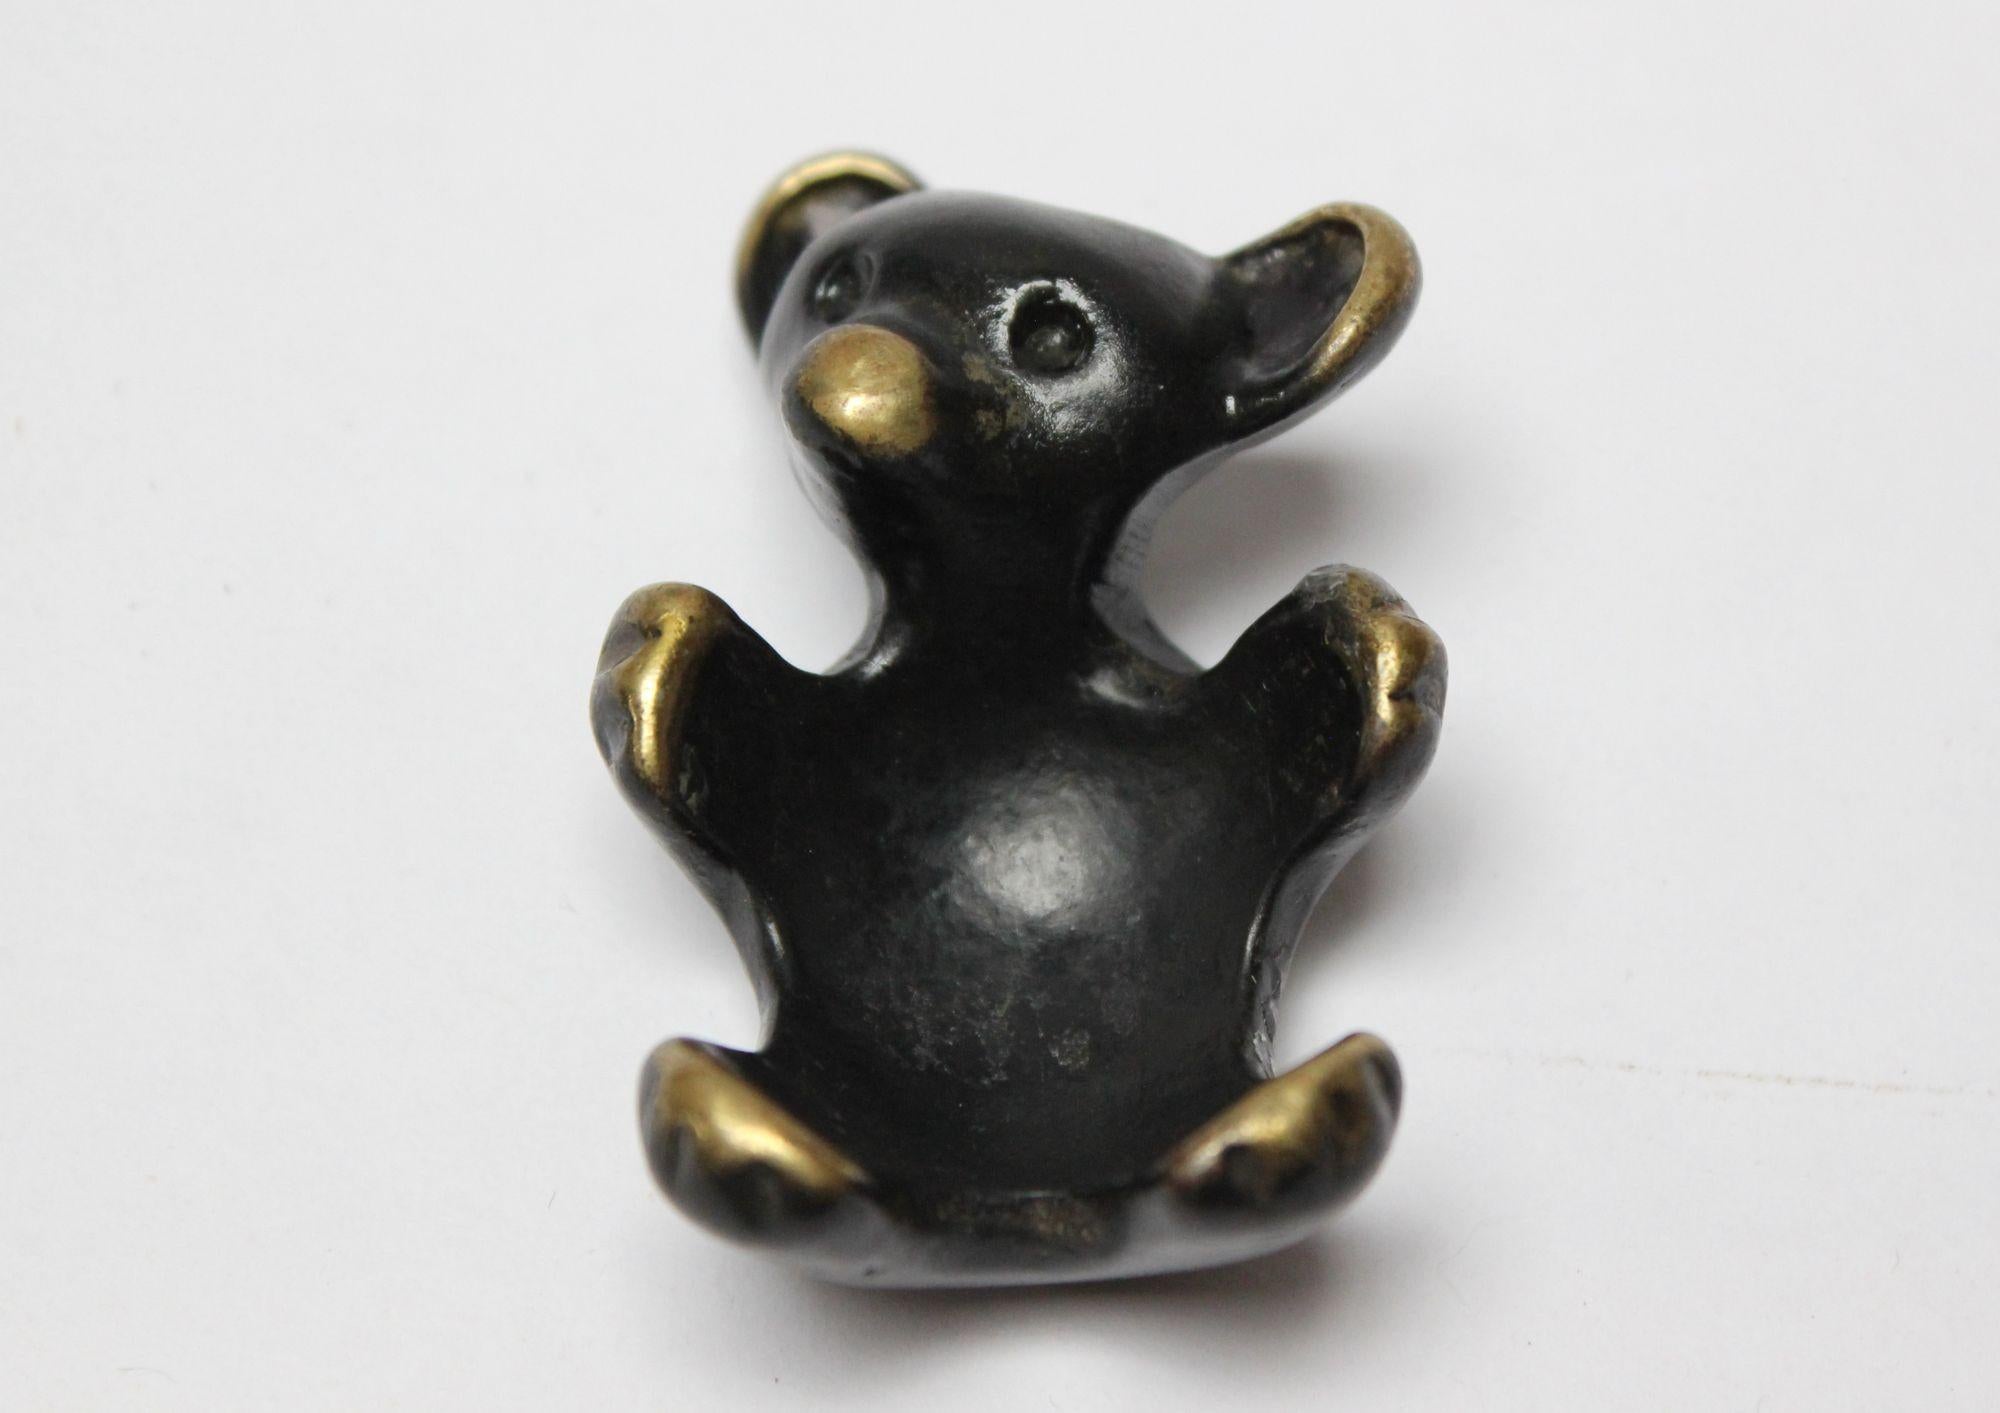 Mid-Century Viennese bear figurine designed by Walter Bosse and Herta Baller as part of “Black Golden Line